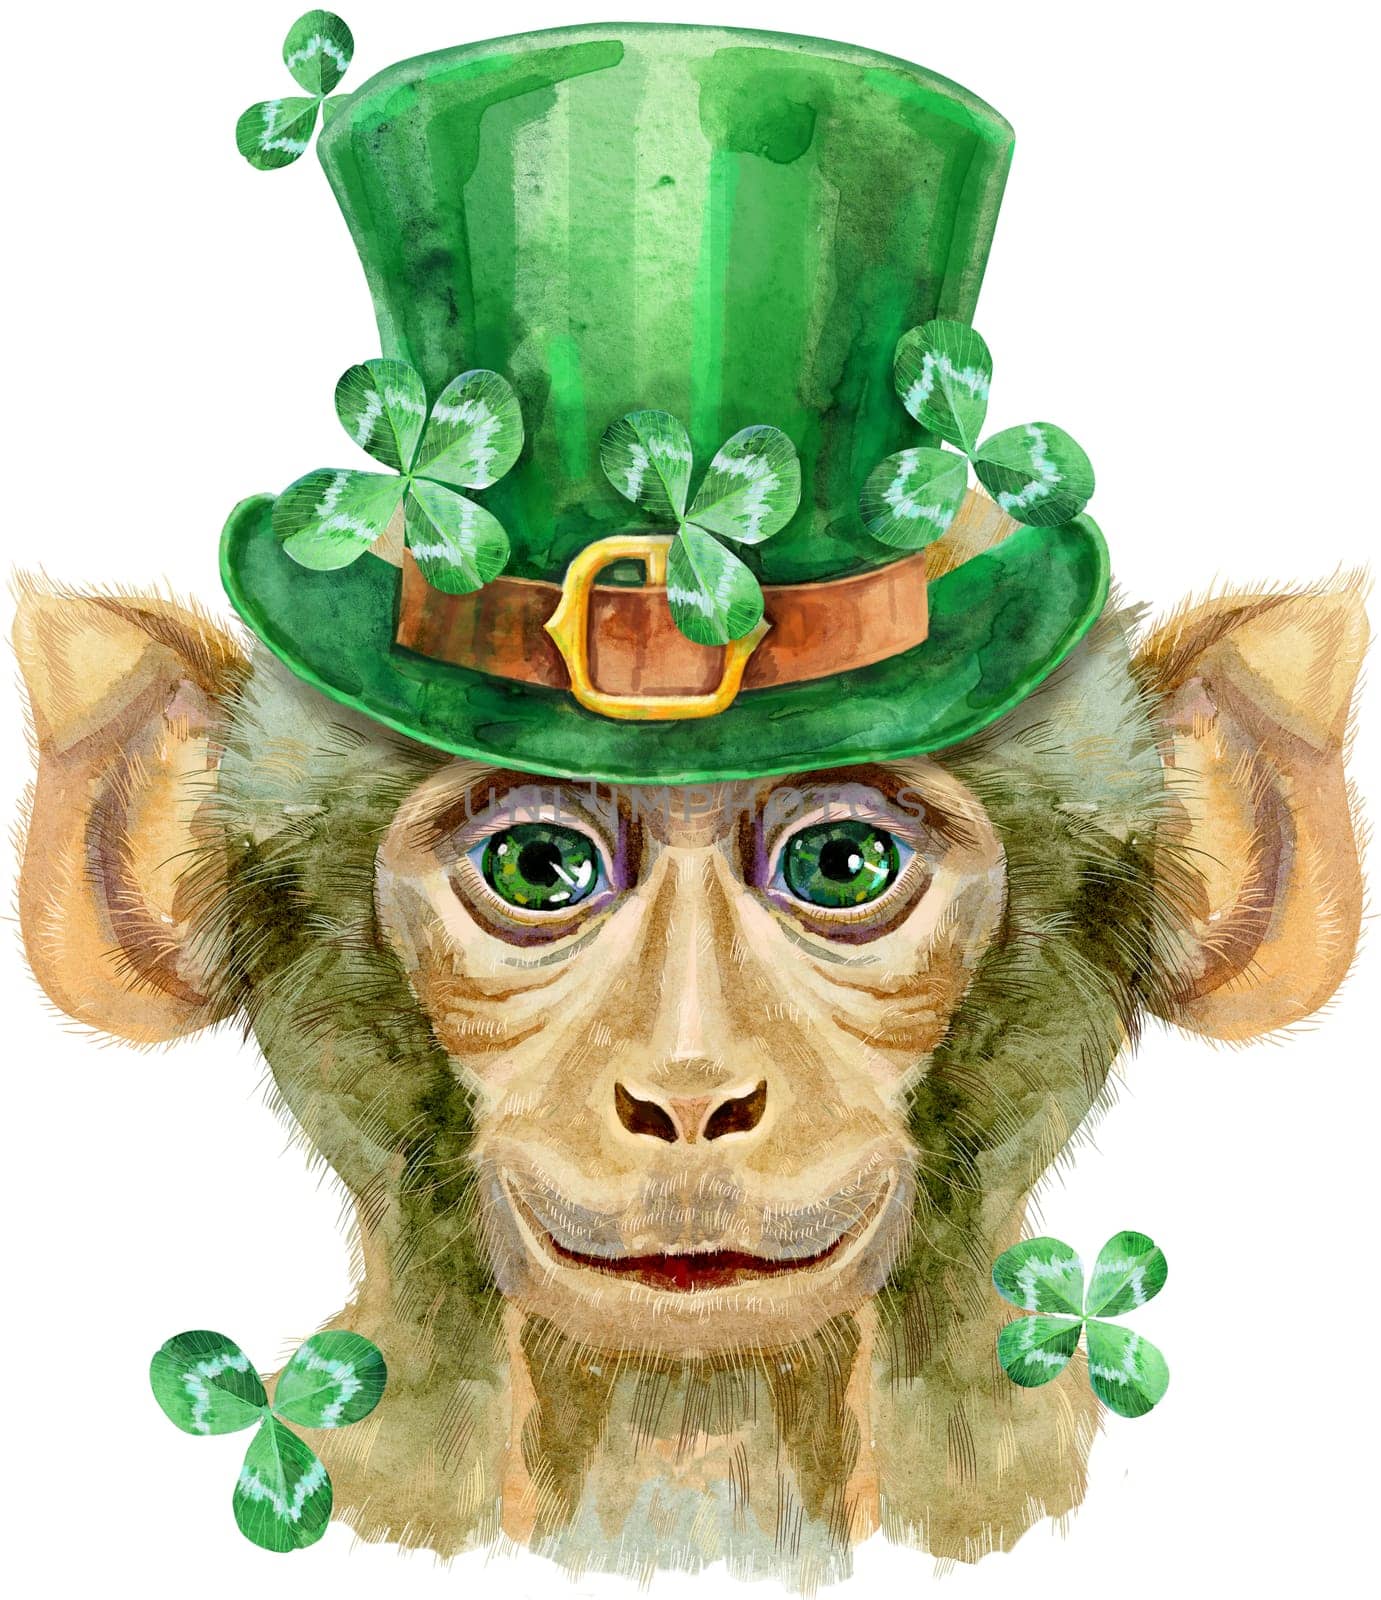 Monkey in green St. Patrick's hat with clover leaves. Watercolor illustration isolated on white background. by NataOmsk